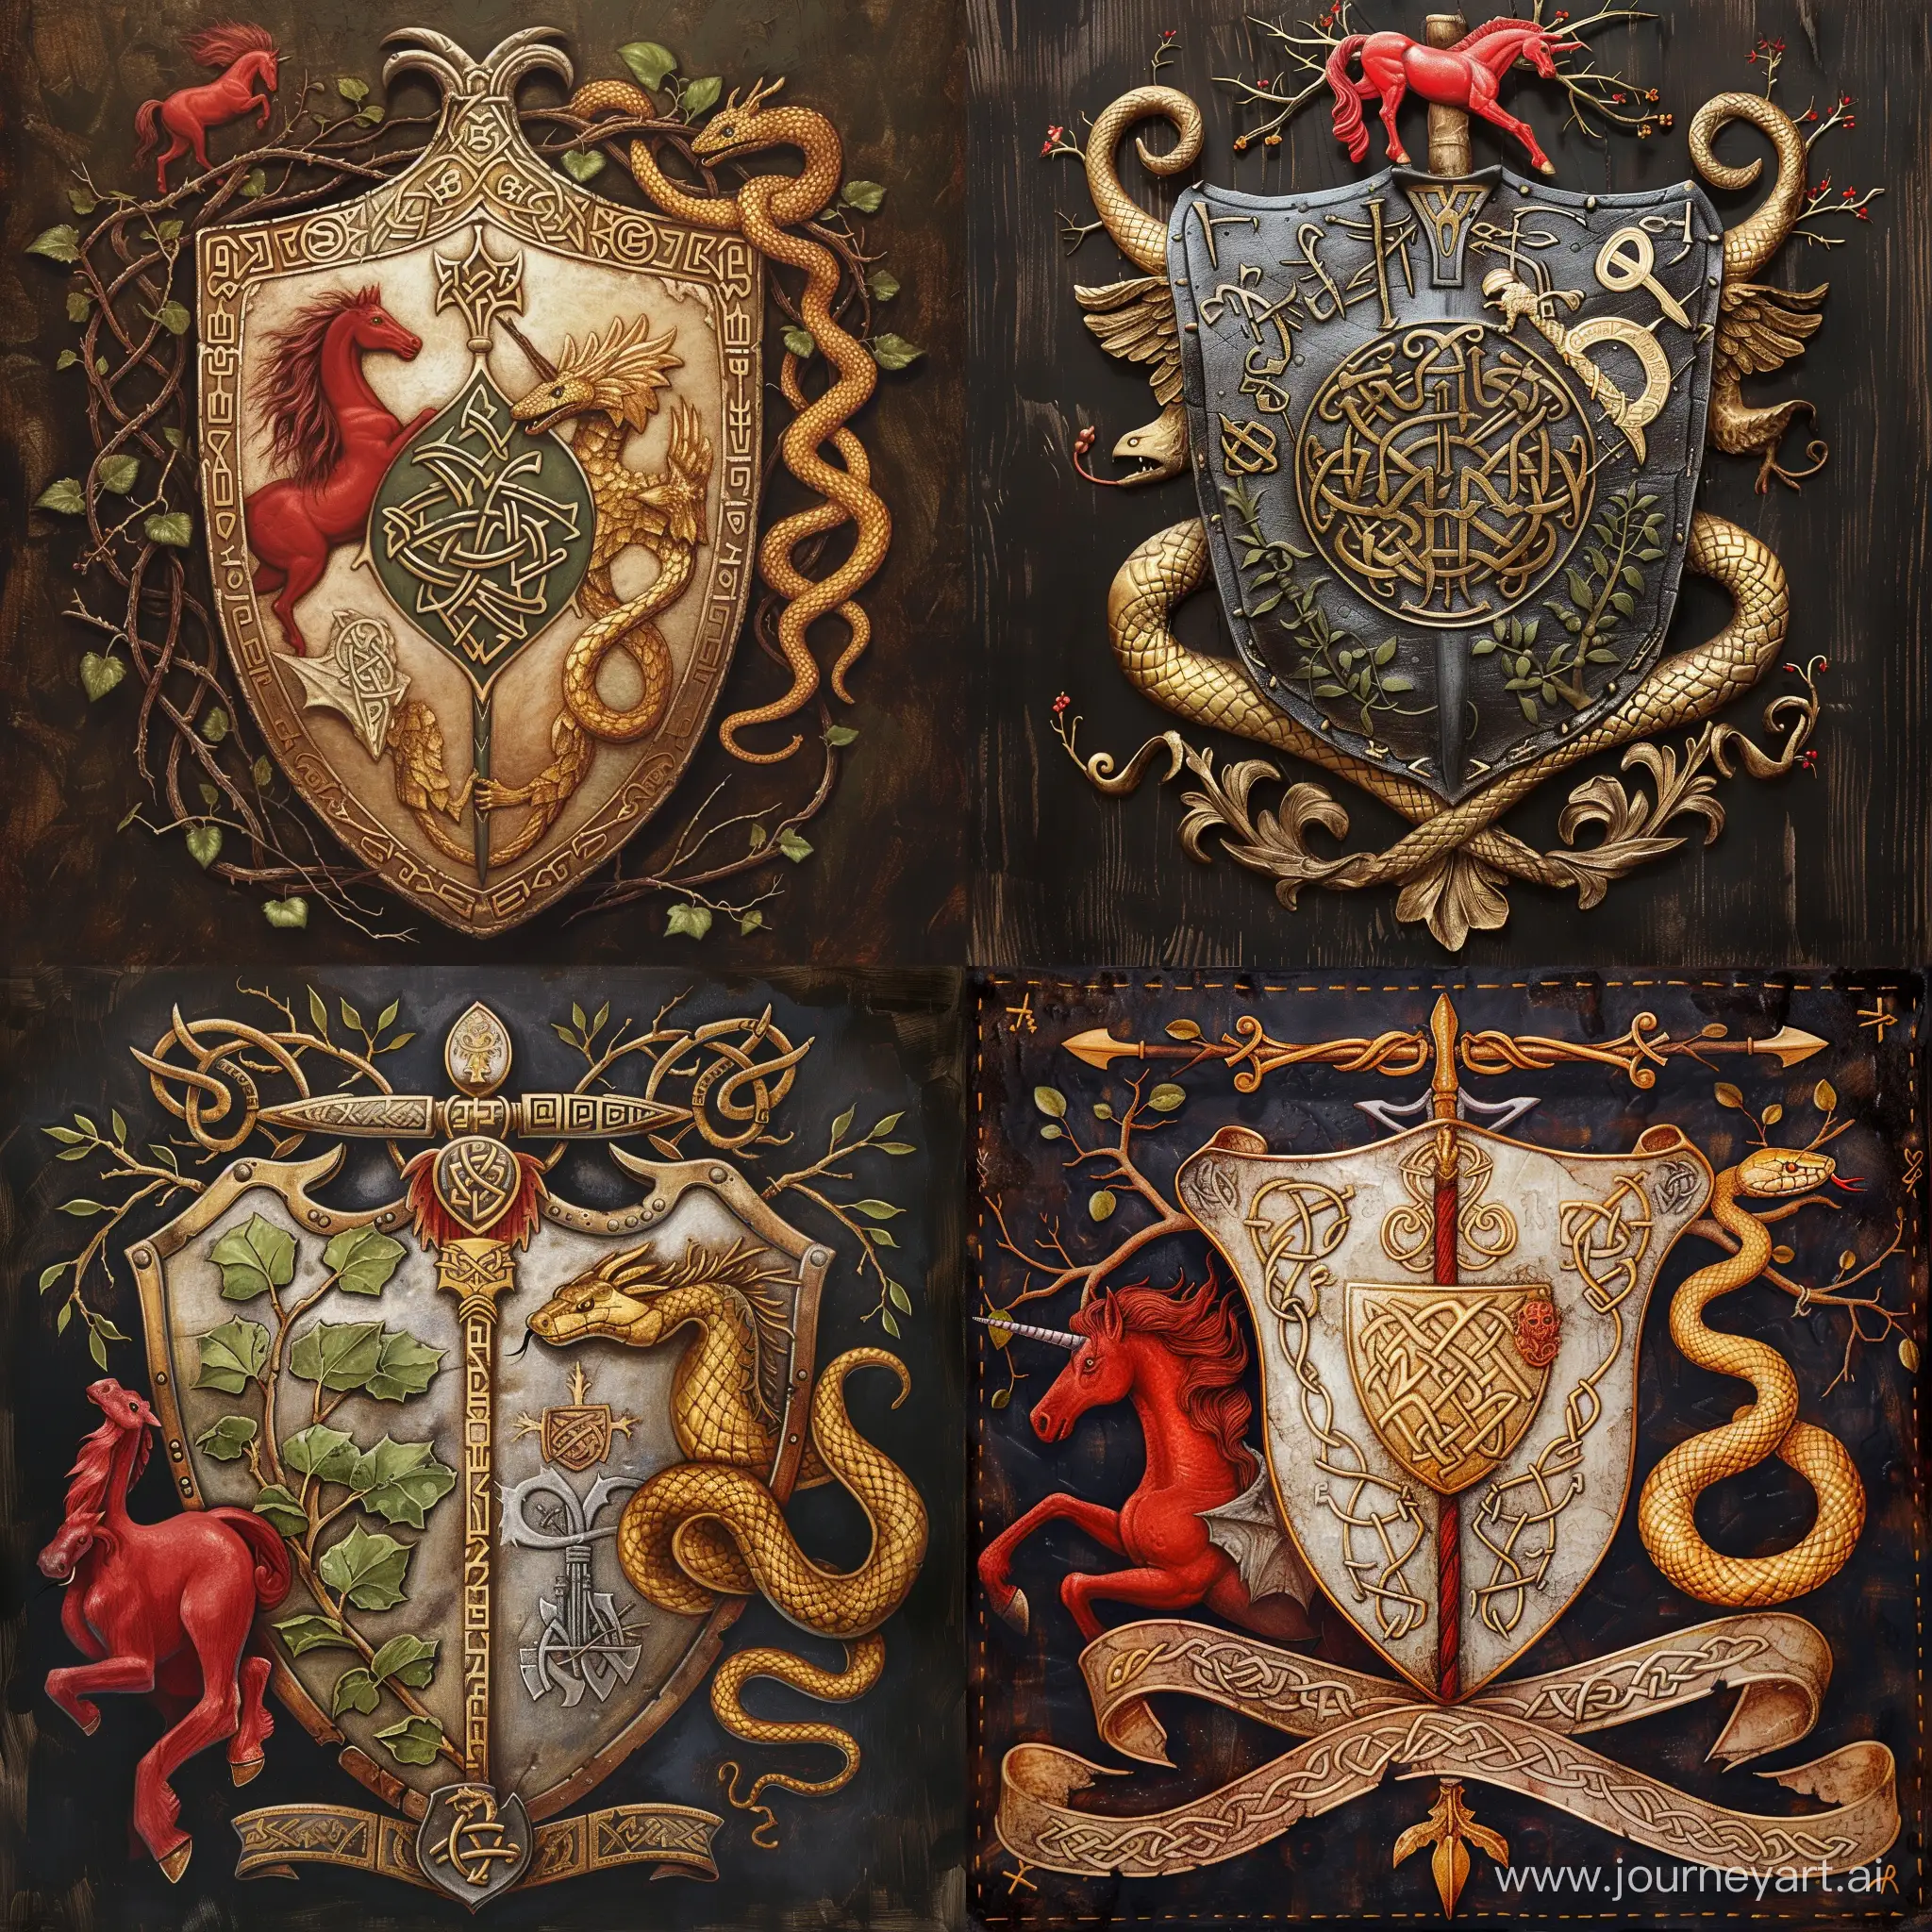 Celtic-Heraldry-Family-Coat-of-Arms-with-Druidic-Symbols-and-Mythical-Creatures